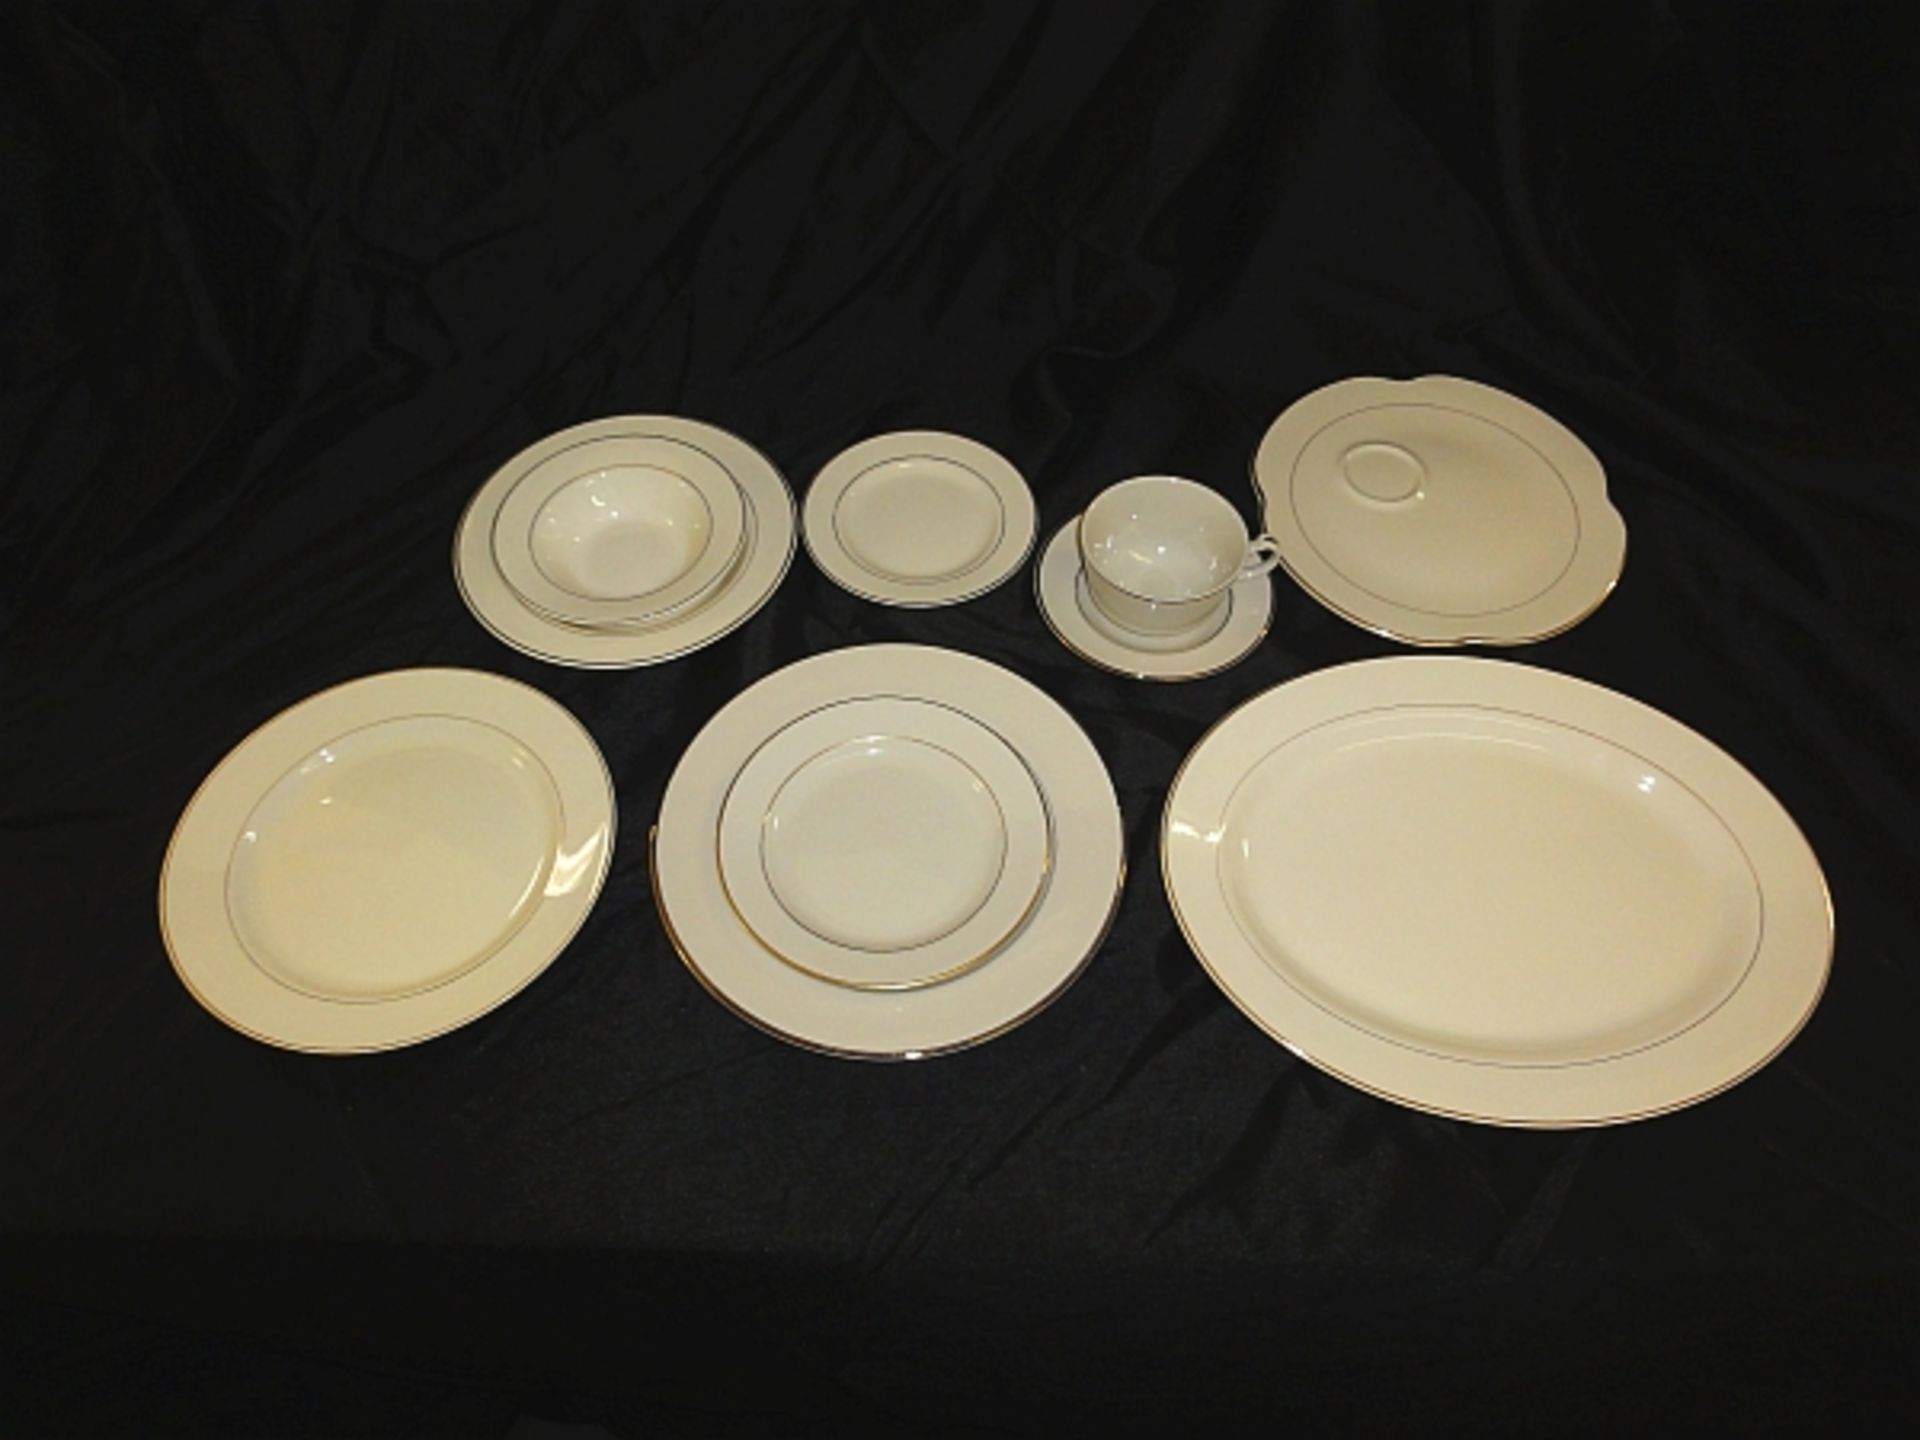 LOT OF 154 IVORY 5" BREAD & BUTTER PLATE W/ GOLD RIM- LOT COME IN 4 MICROWIRE CRATES BILLED @ - Image 2 of 2